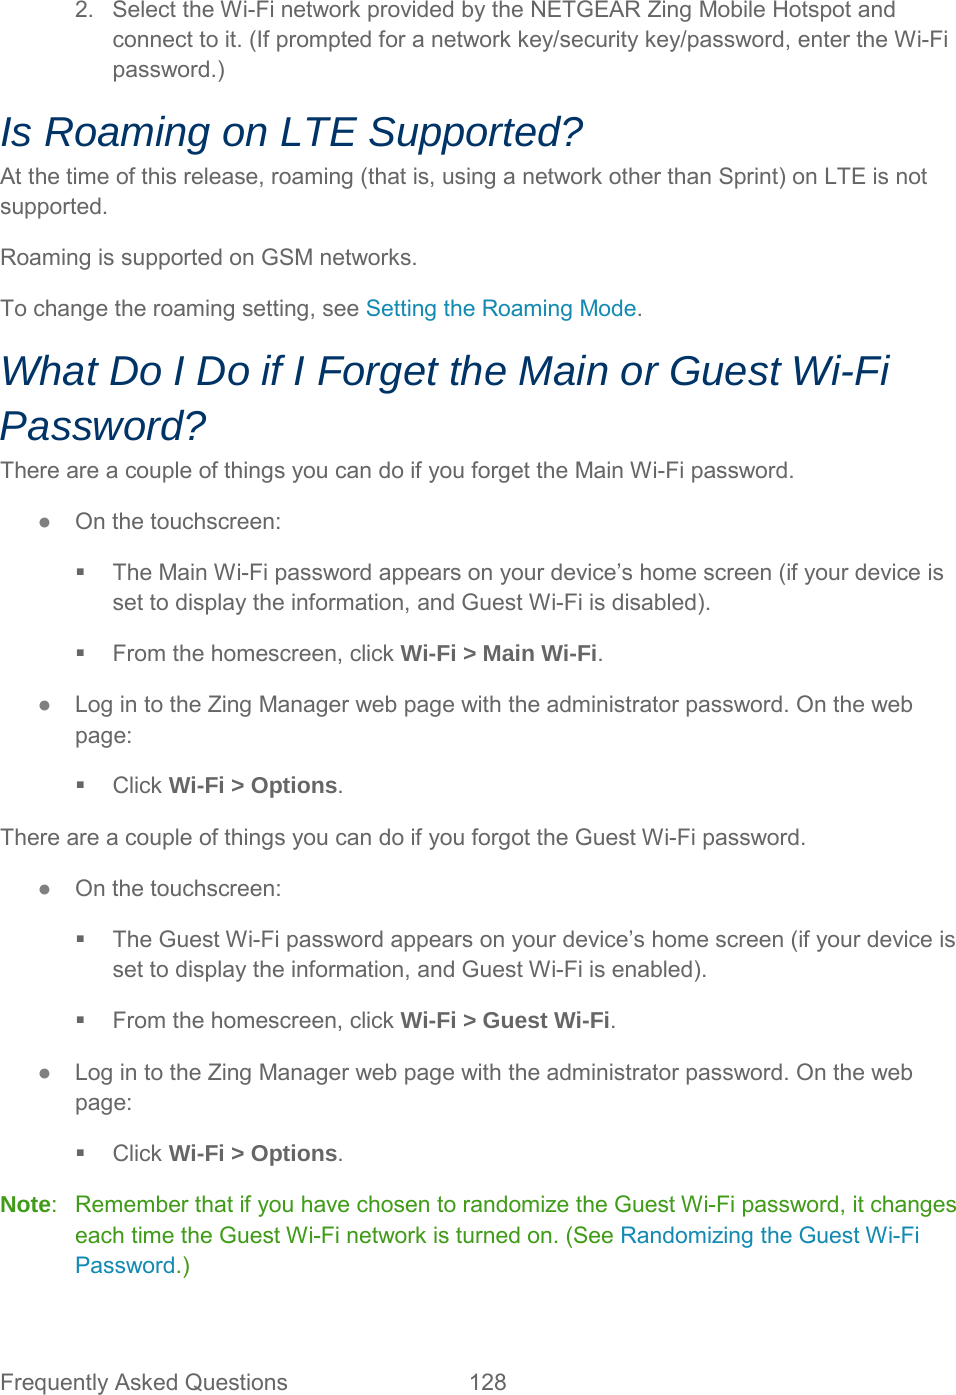 2. Select the Wi-Fi network provided by the NETGEAR Zing Mobile Hotspot and connect to it. (If prompted for a network key/security key/password, enter the Wi-Fi password.) Is Roaming on LTE Supported? At the time of this release, roaming (that is, using a network other than Sprint) on LTE is not supported. Roaming is supported on GSM networks. To change the roaming setting, see Setting the Roaming Mode. What Do I Do if I Forget the Main or Guest Wi-Fi Password? There are a couple of things you can do if you forget the Main Wi-Fi password. ●  On the touchscreen:  The Main Wi-Fi password appears on your device’s home screen (if your device is set to display the information, and Guest Wi-Fi is disabled).  From the homescreen, click Wi-Fi &gt; Main Wi-Fi. ●  Log in to the Zing Manager web page with the administrator password. On the web page:  Click Wi-Fi &gt; Options. There are a couple of things you can do if you forgot the Guest Wi-Fi password. ●  On the touchscreen:  The Guest Wi-Fi password appears on your device’s home screen (if your device is set to display the information, and Guest Wi-Fi is enabled).  From the homescreen, click Wi-Fi &gt; Guest Wi-Fi. ●  Log in to the Zing Manager web page with the administrator password. On the web page:   Click Wi-Fi &gt; Options. Note:  Remember that if you have chosen to randomize the Guest Wi-Fi password, it changes each time the Guest Wi-Fi network is turned on. (See Randomizing the Guest Wi-Fi Password.) Frequently Asked Questions 128   